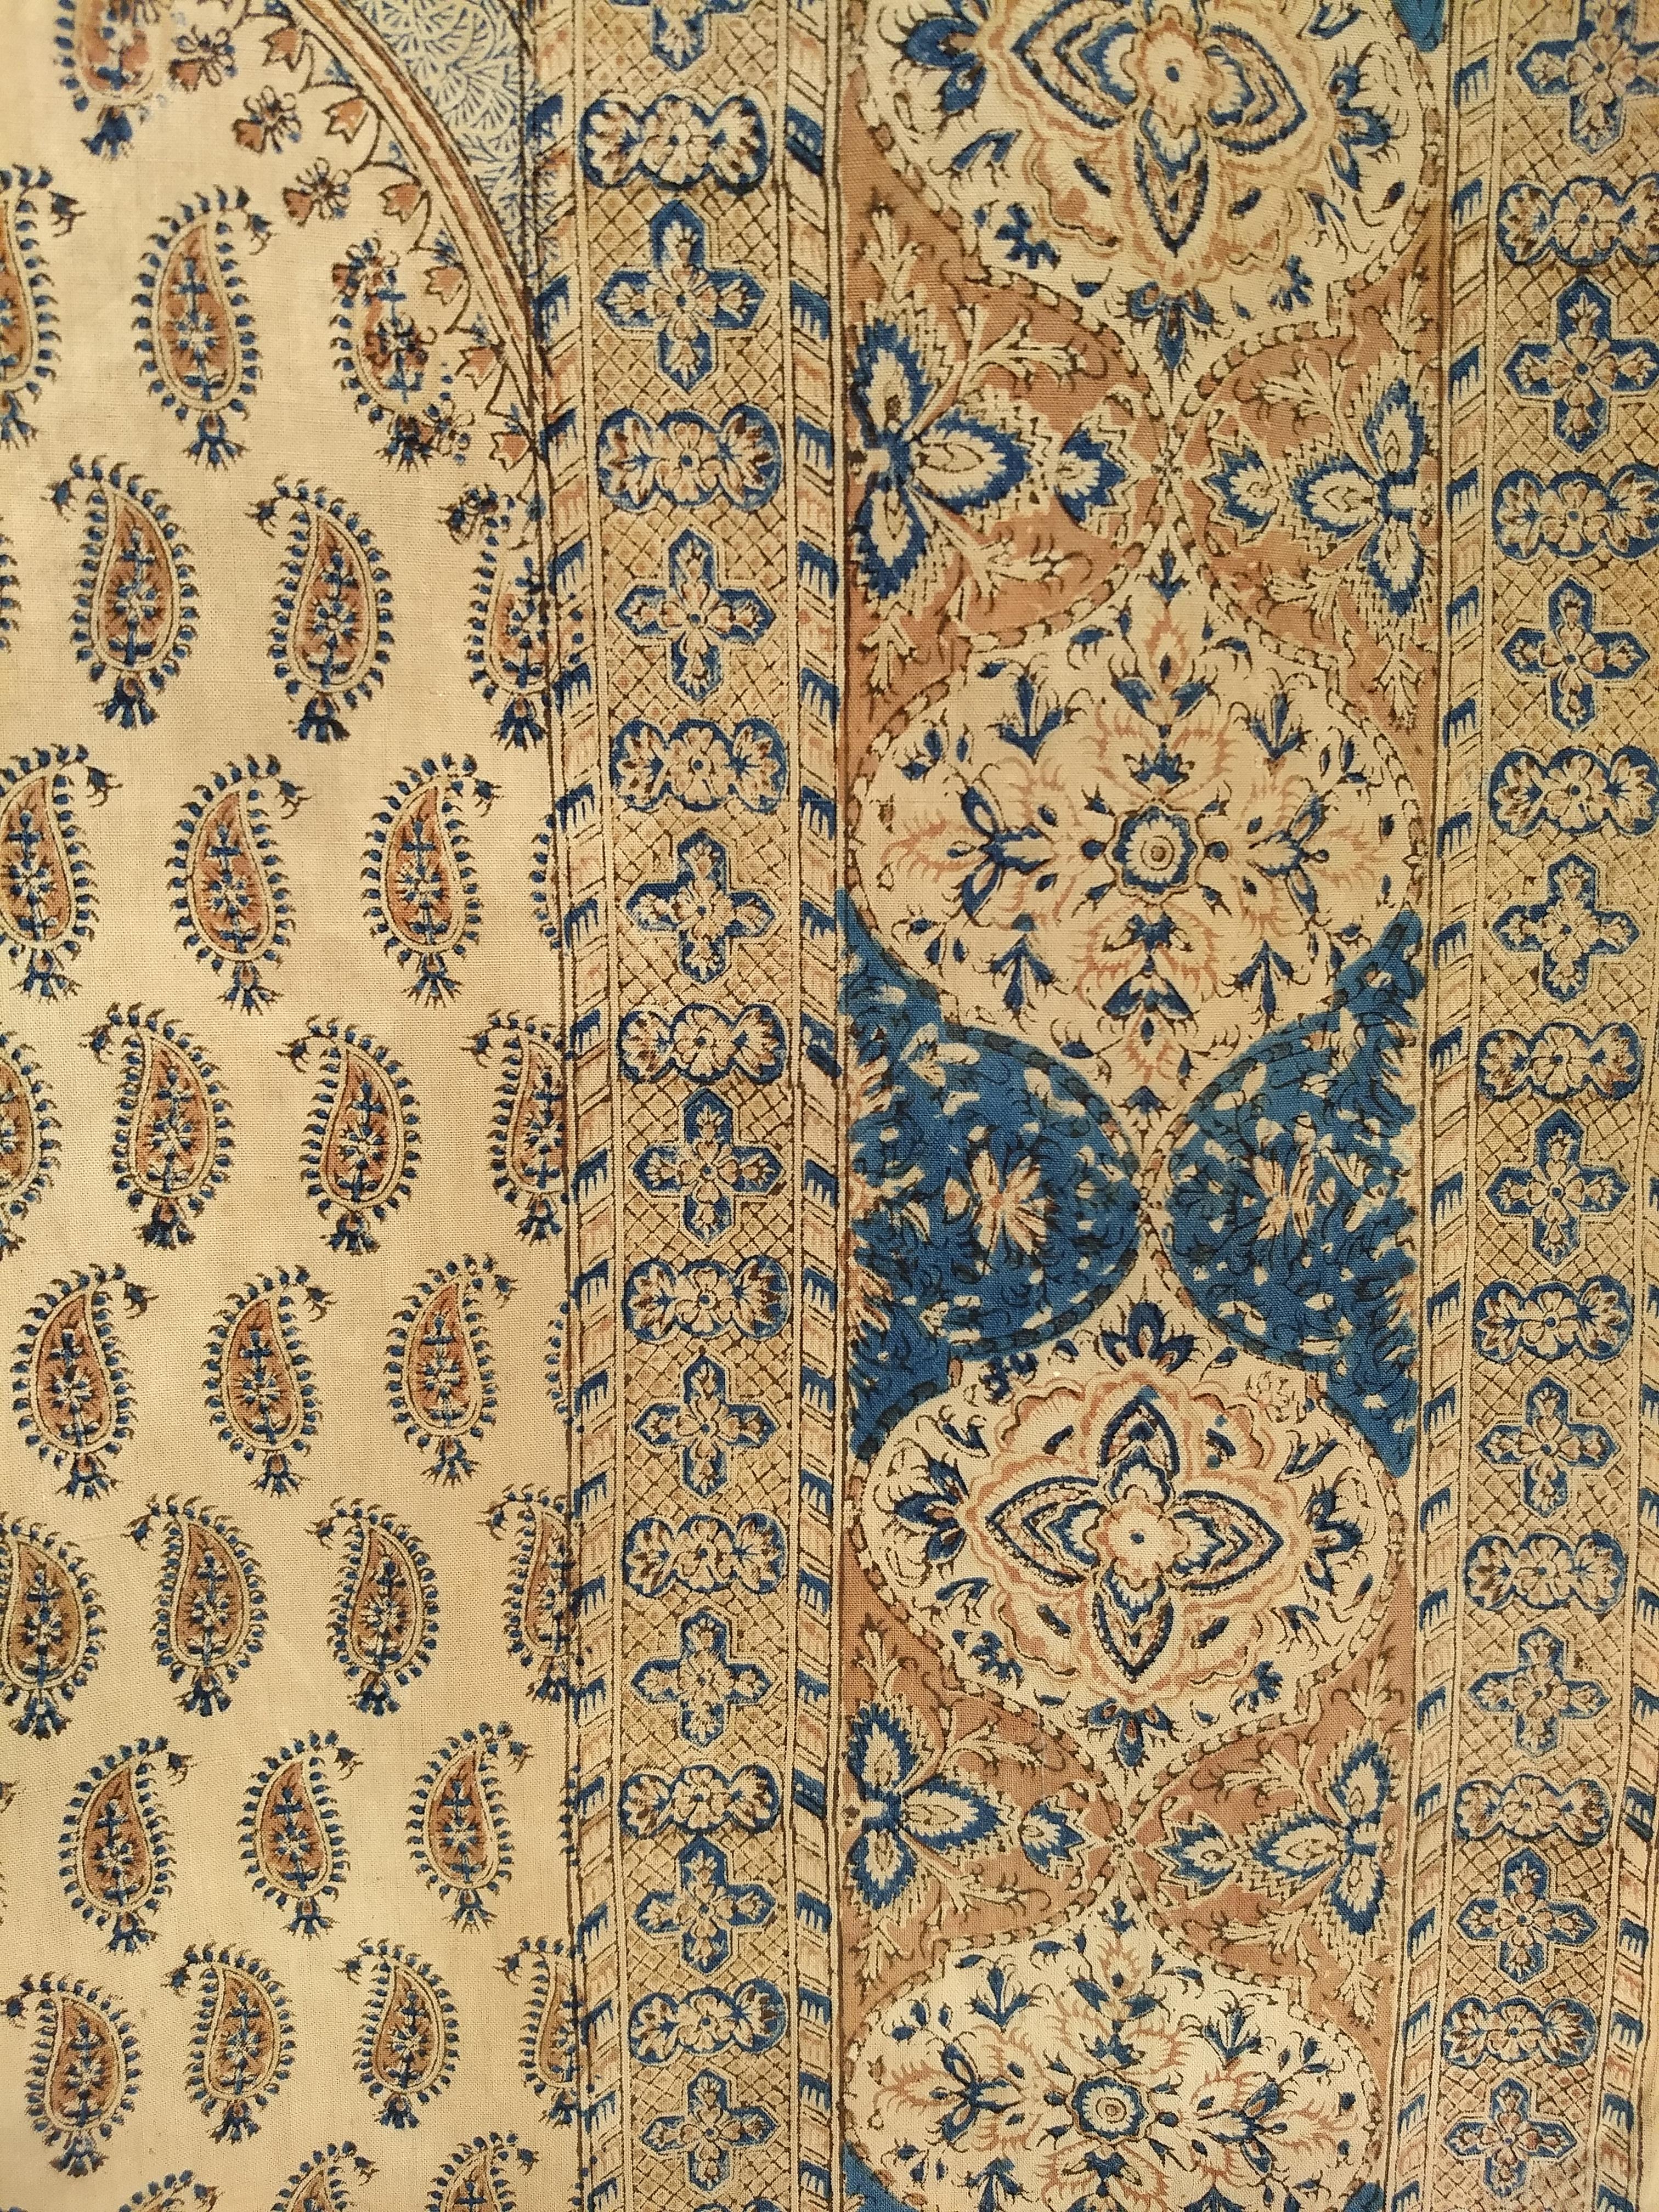 20th Century Vintage Persian Hand-Crafted Kalamkar Block Print Textile with a Paisley Pattern